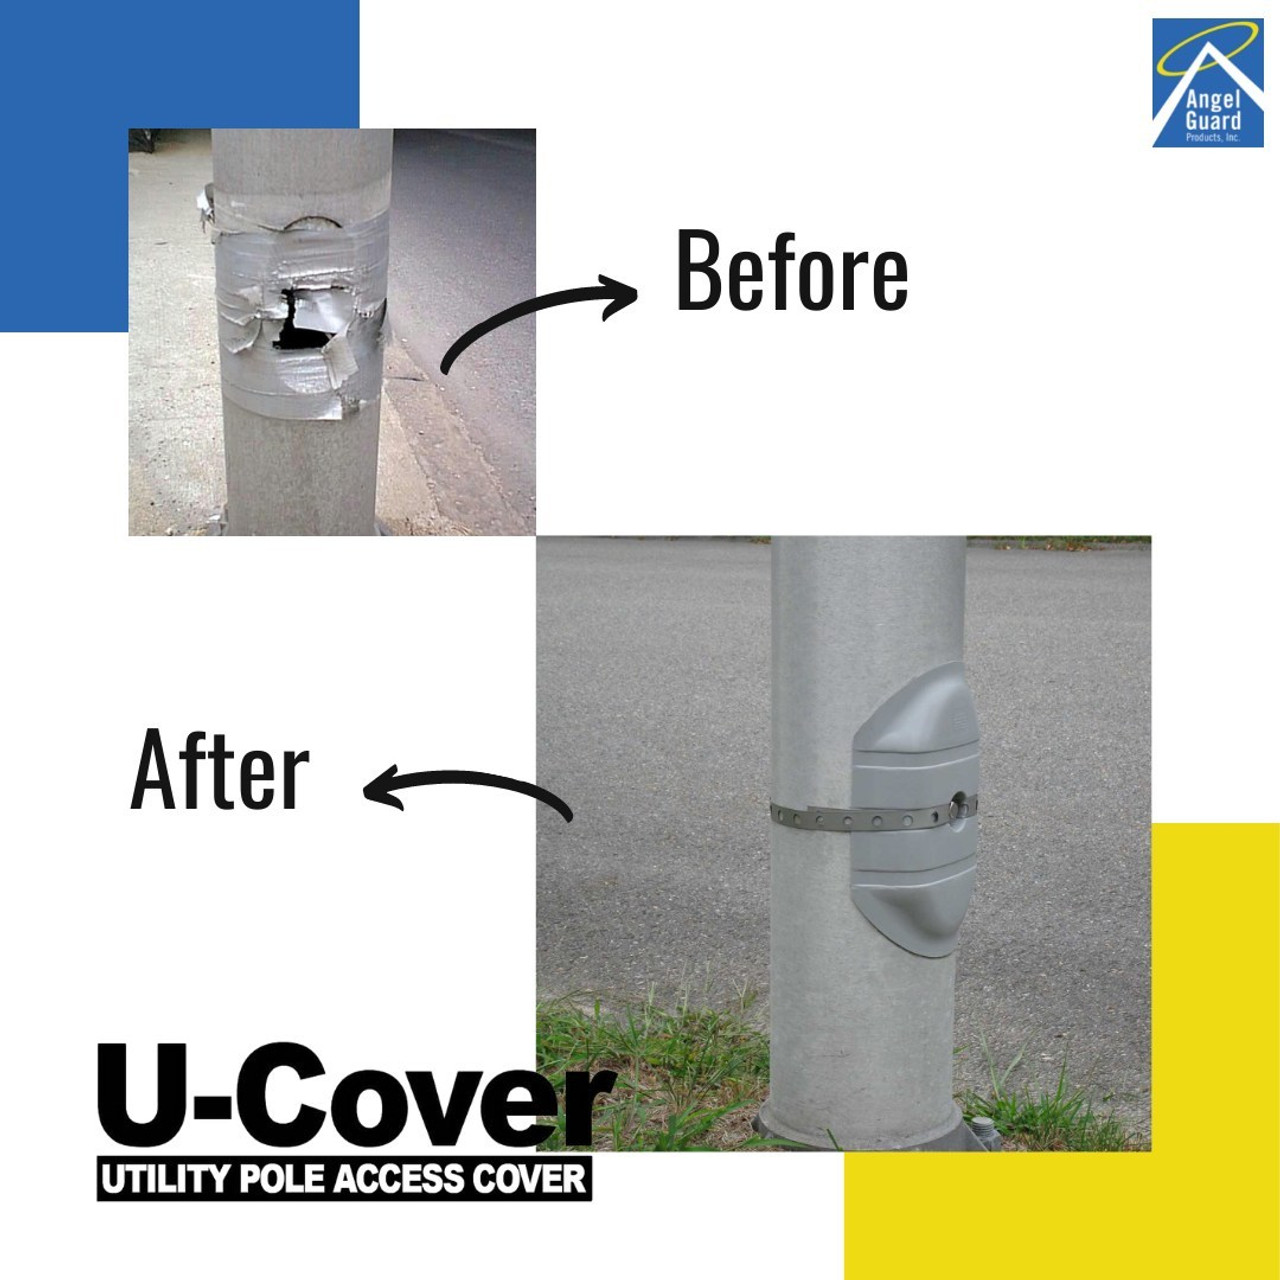 U-Cover Lamp Post Cover 2 - lamp post cover, hand hole cover, light pole access covers, street lighting systems